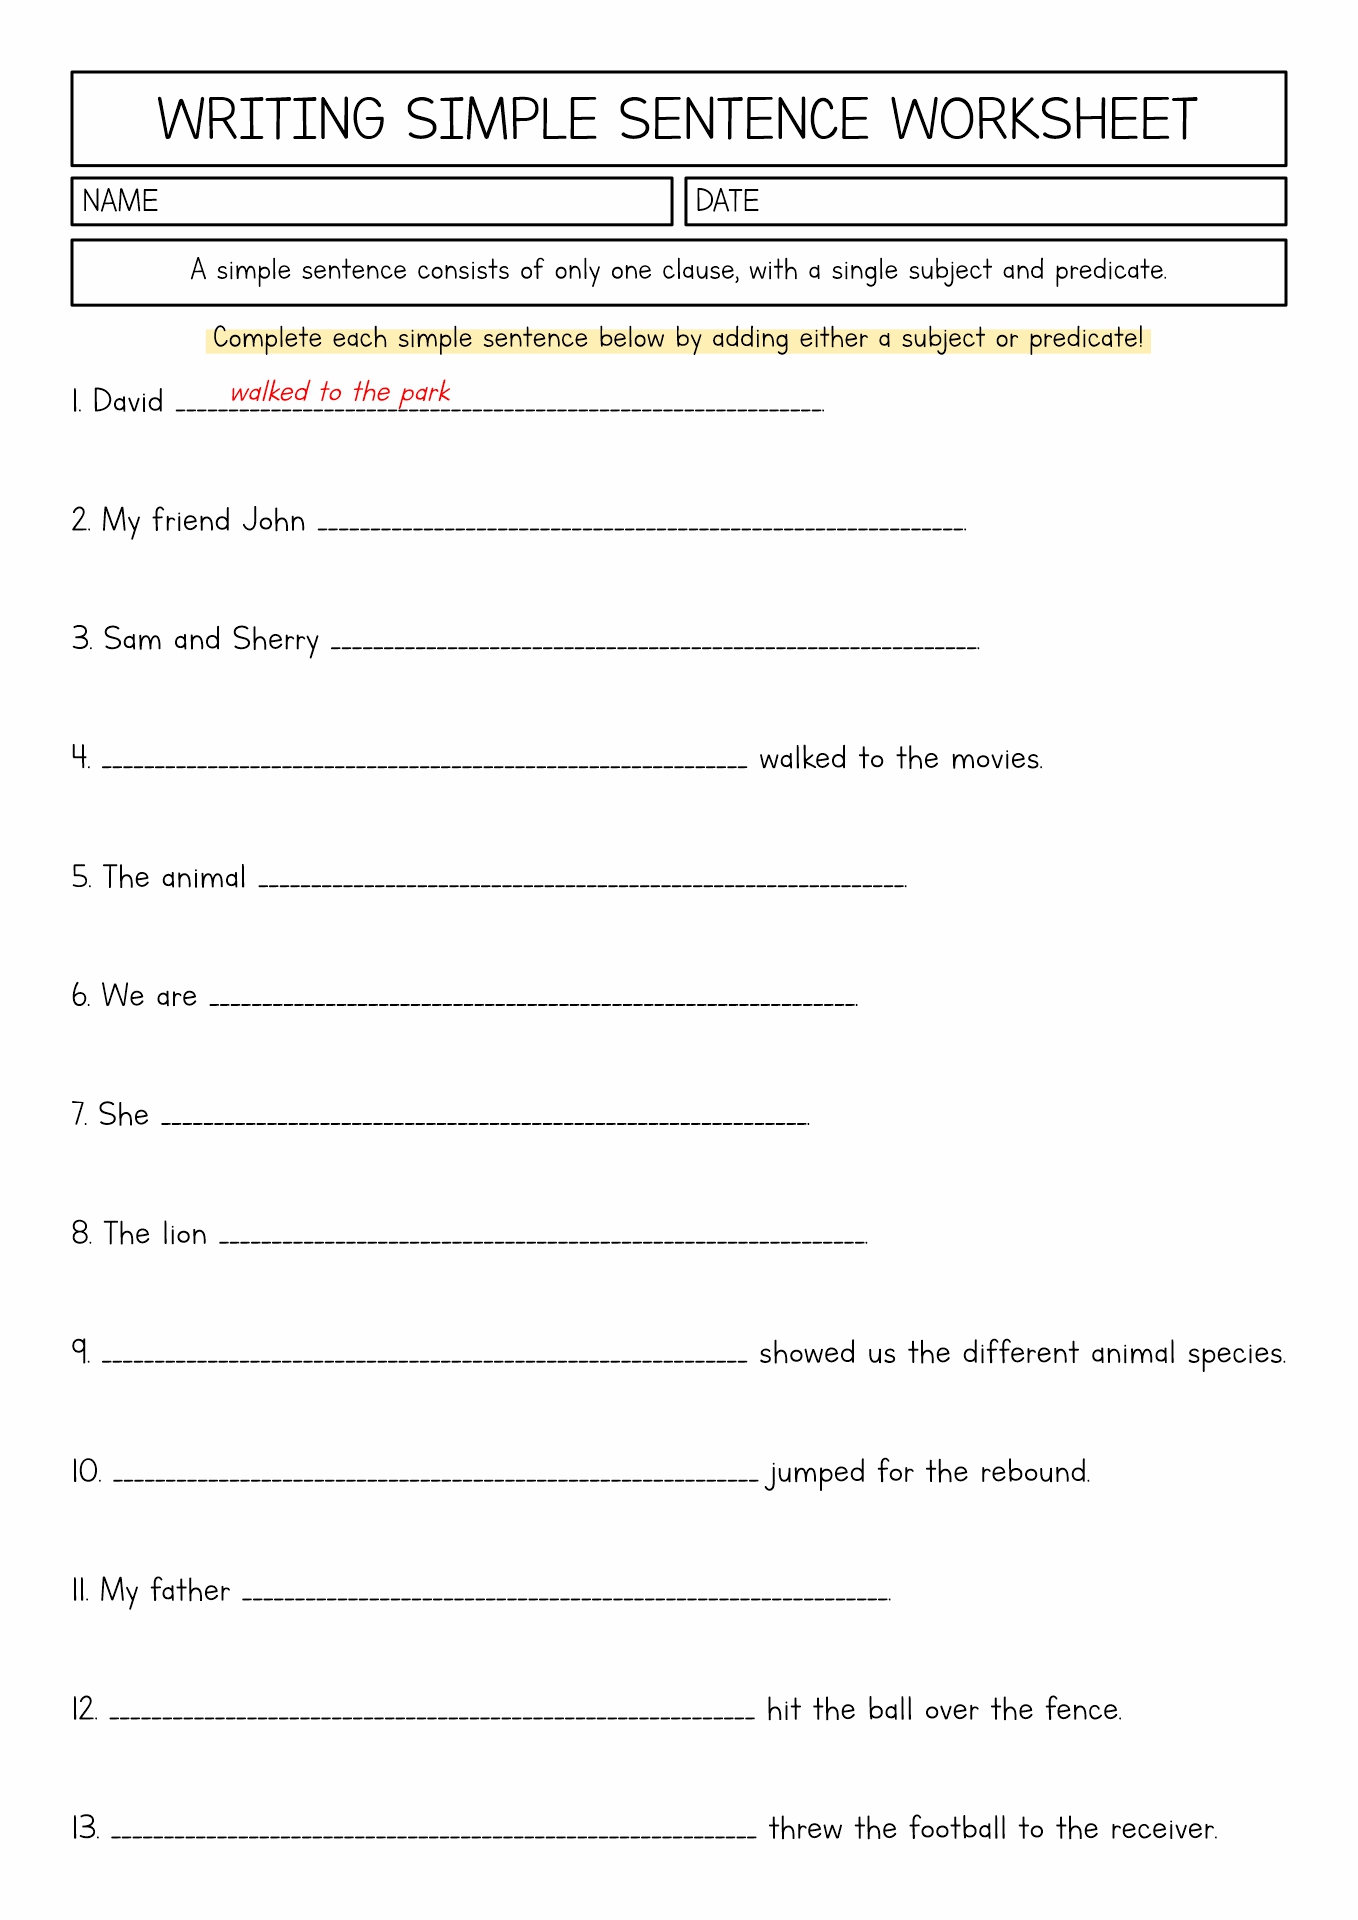 18-best-images-of-4th-grade-essay-writing-worksheets-free-creative